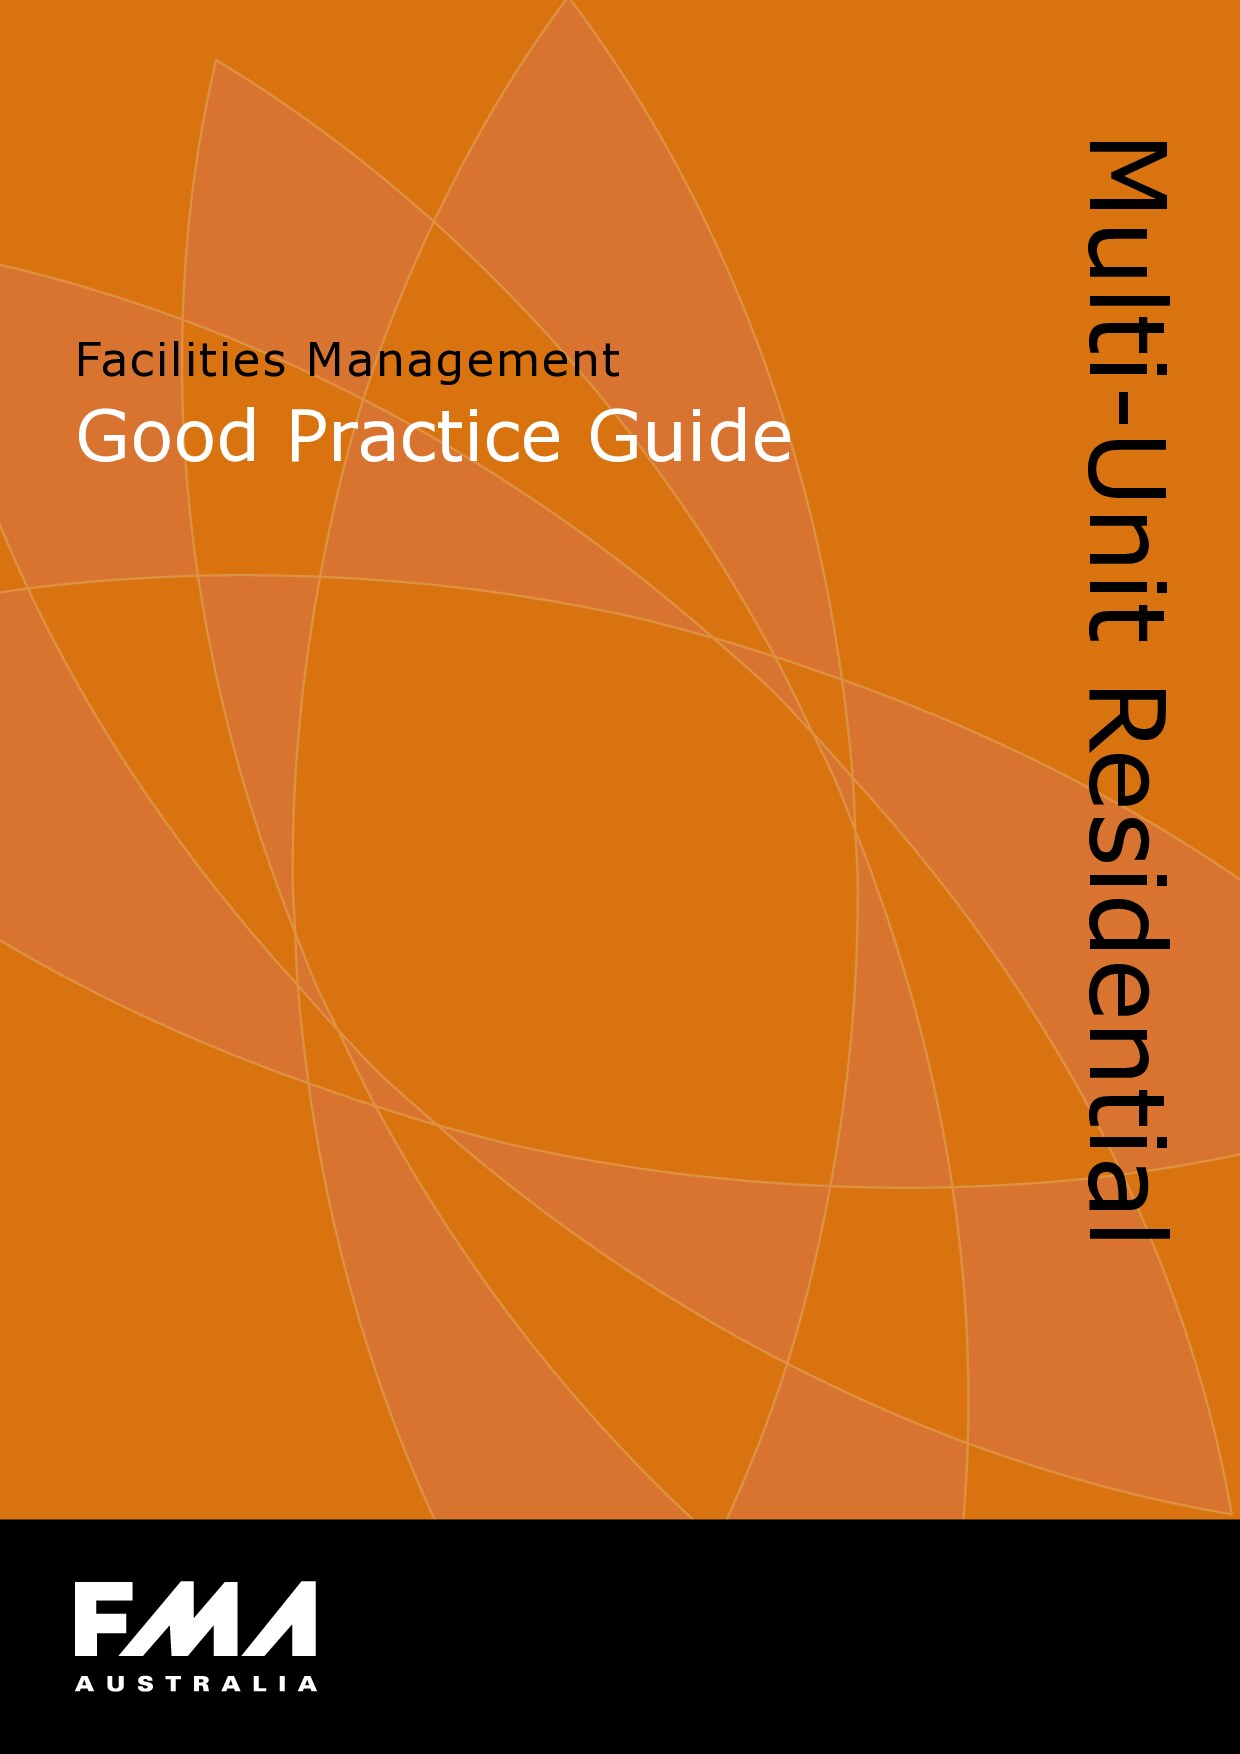 Facilities management good practice guide: Multi-unit residential